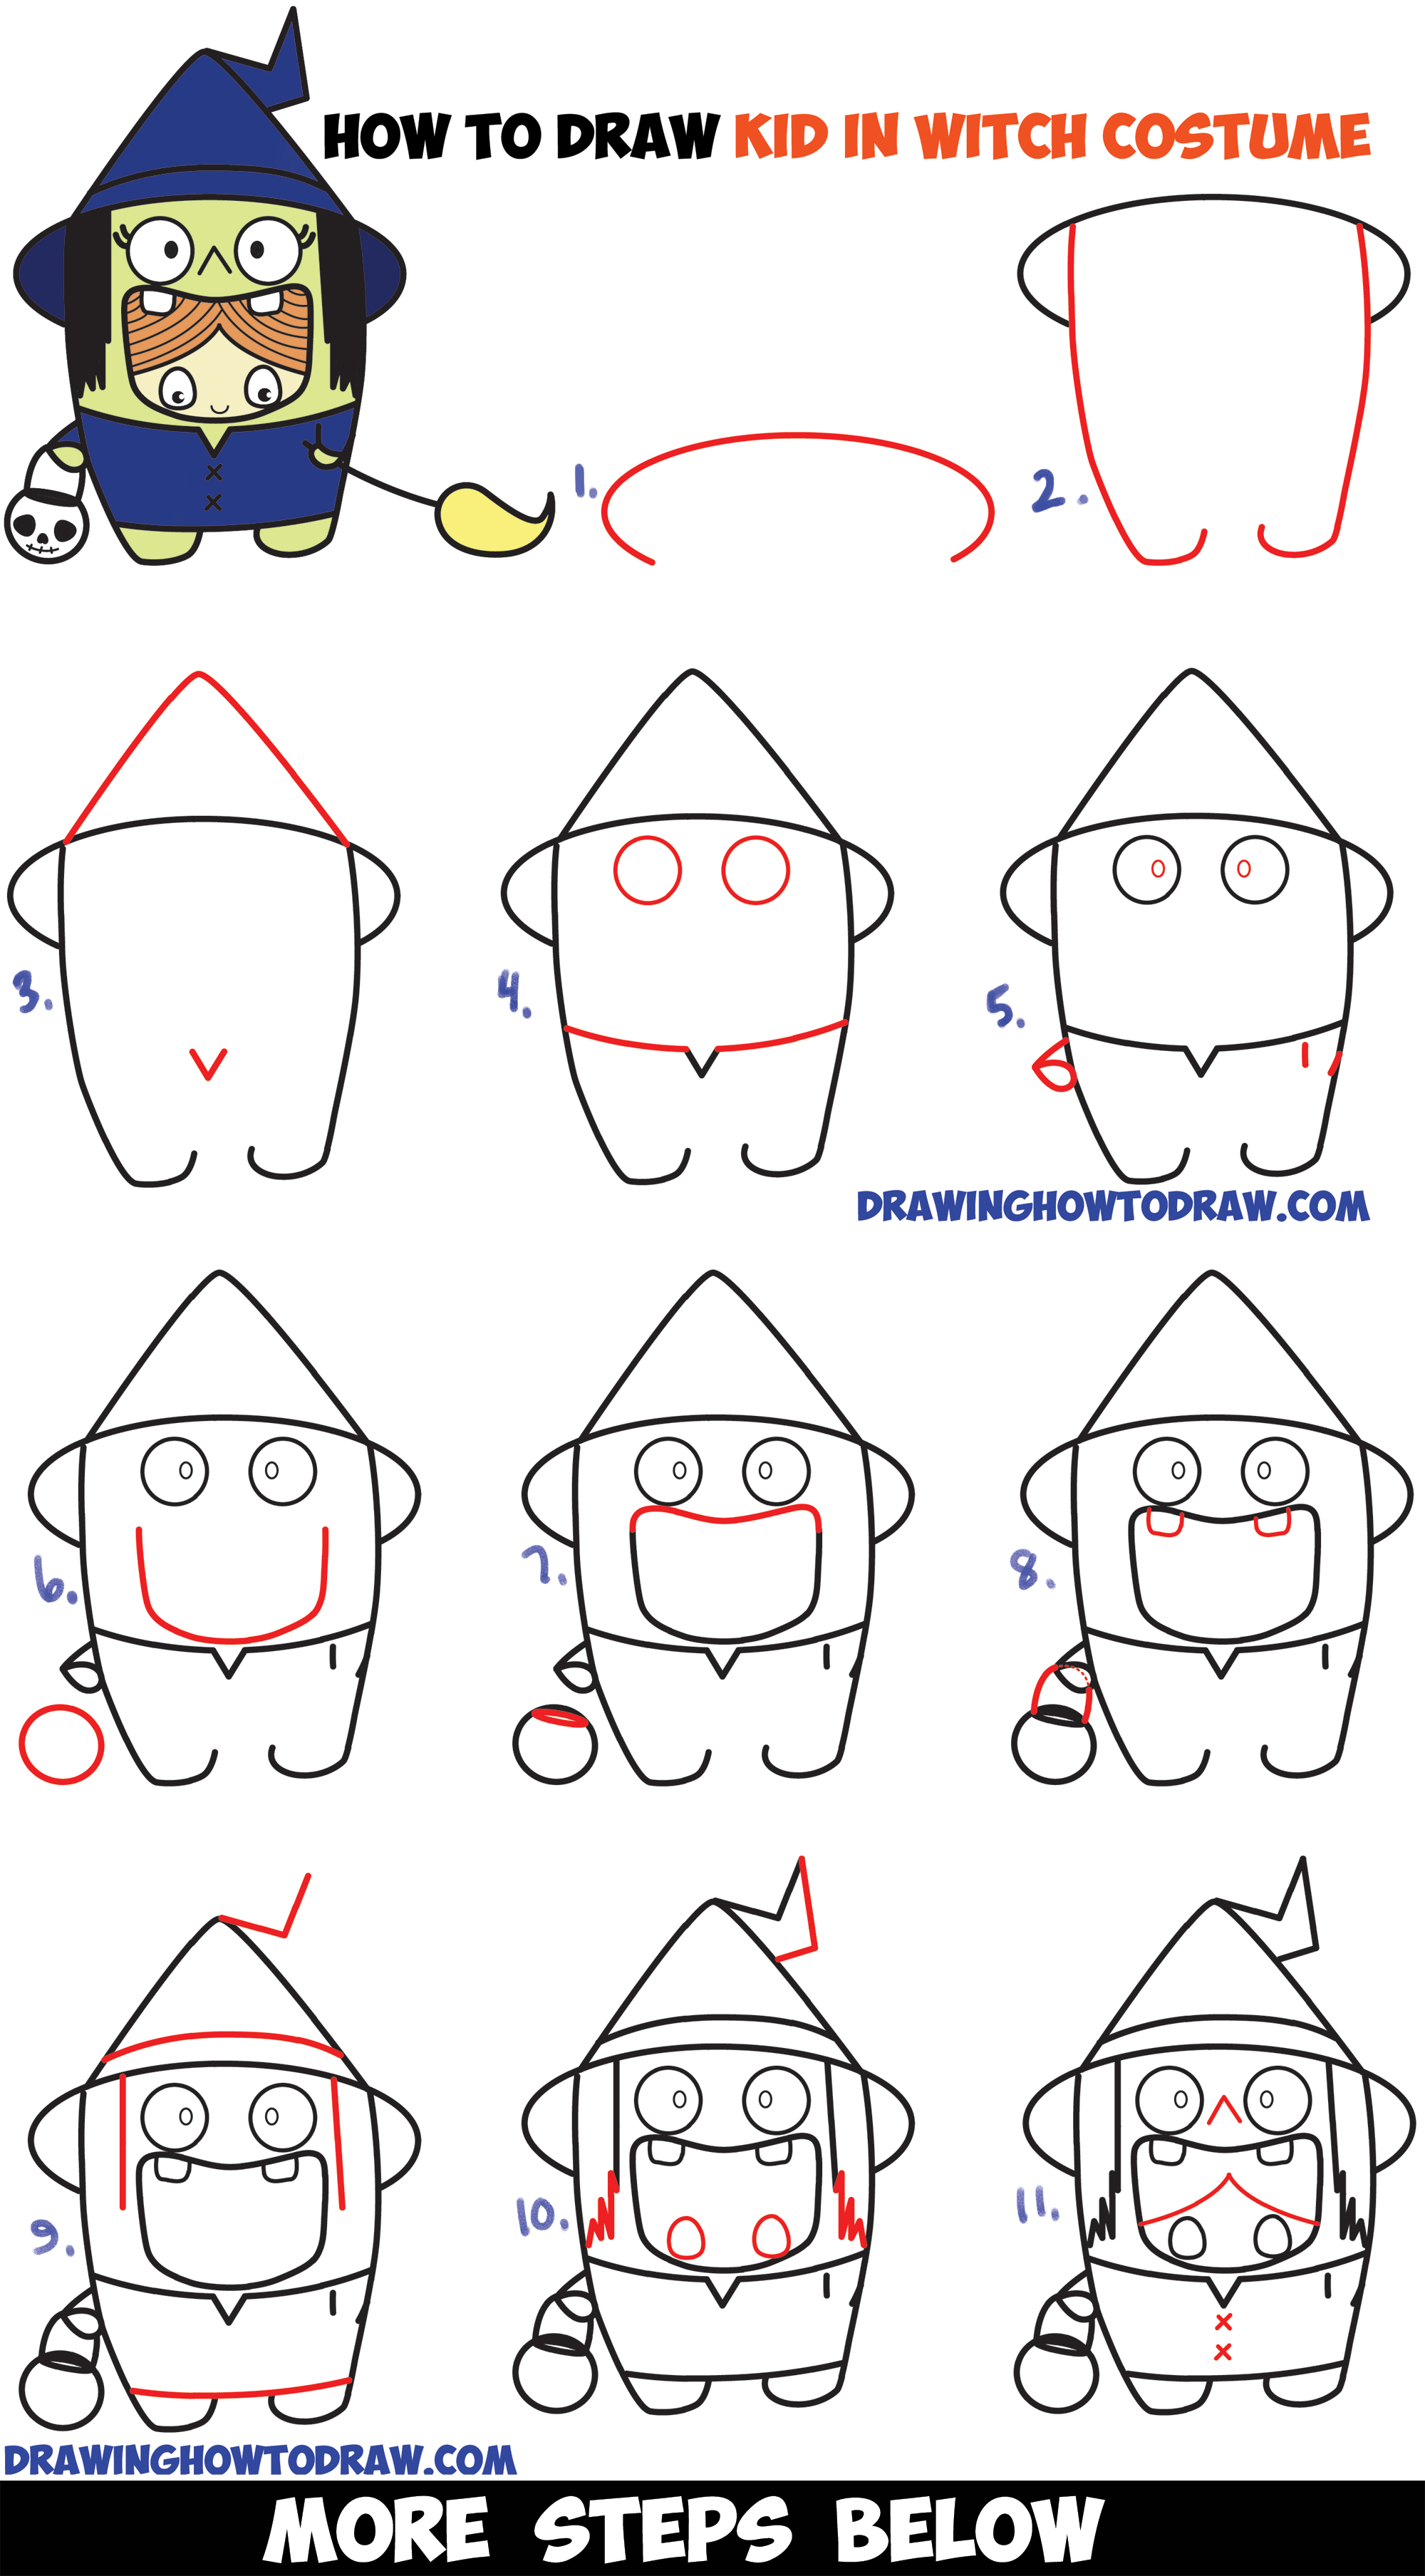 ☀ How to draw halloween pictures step by step gail's blog